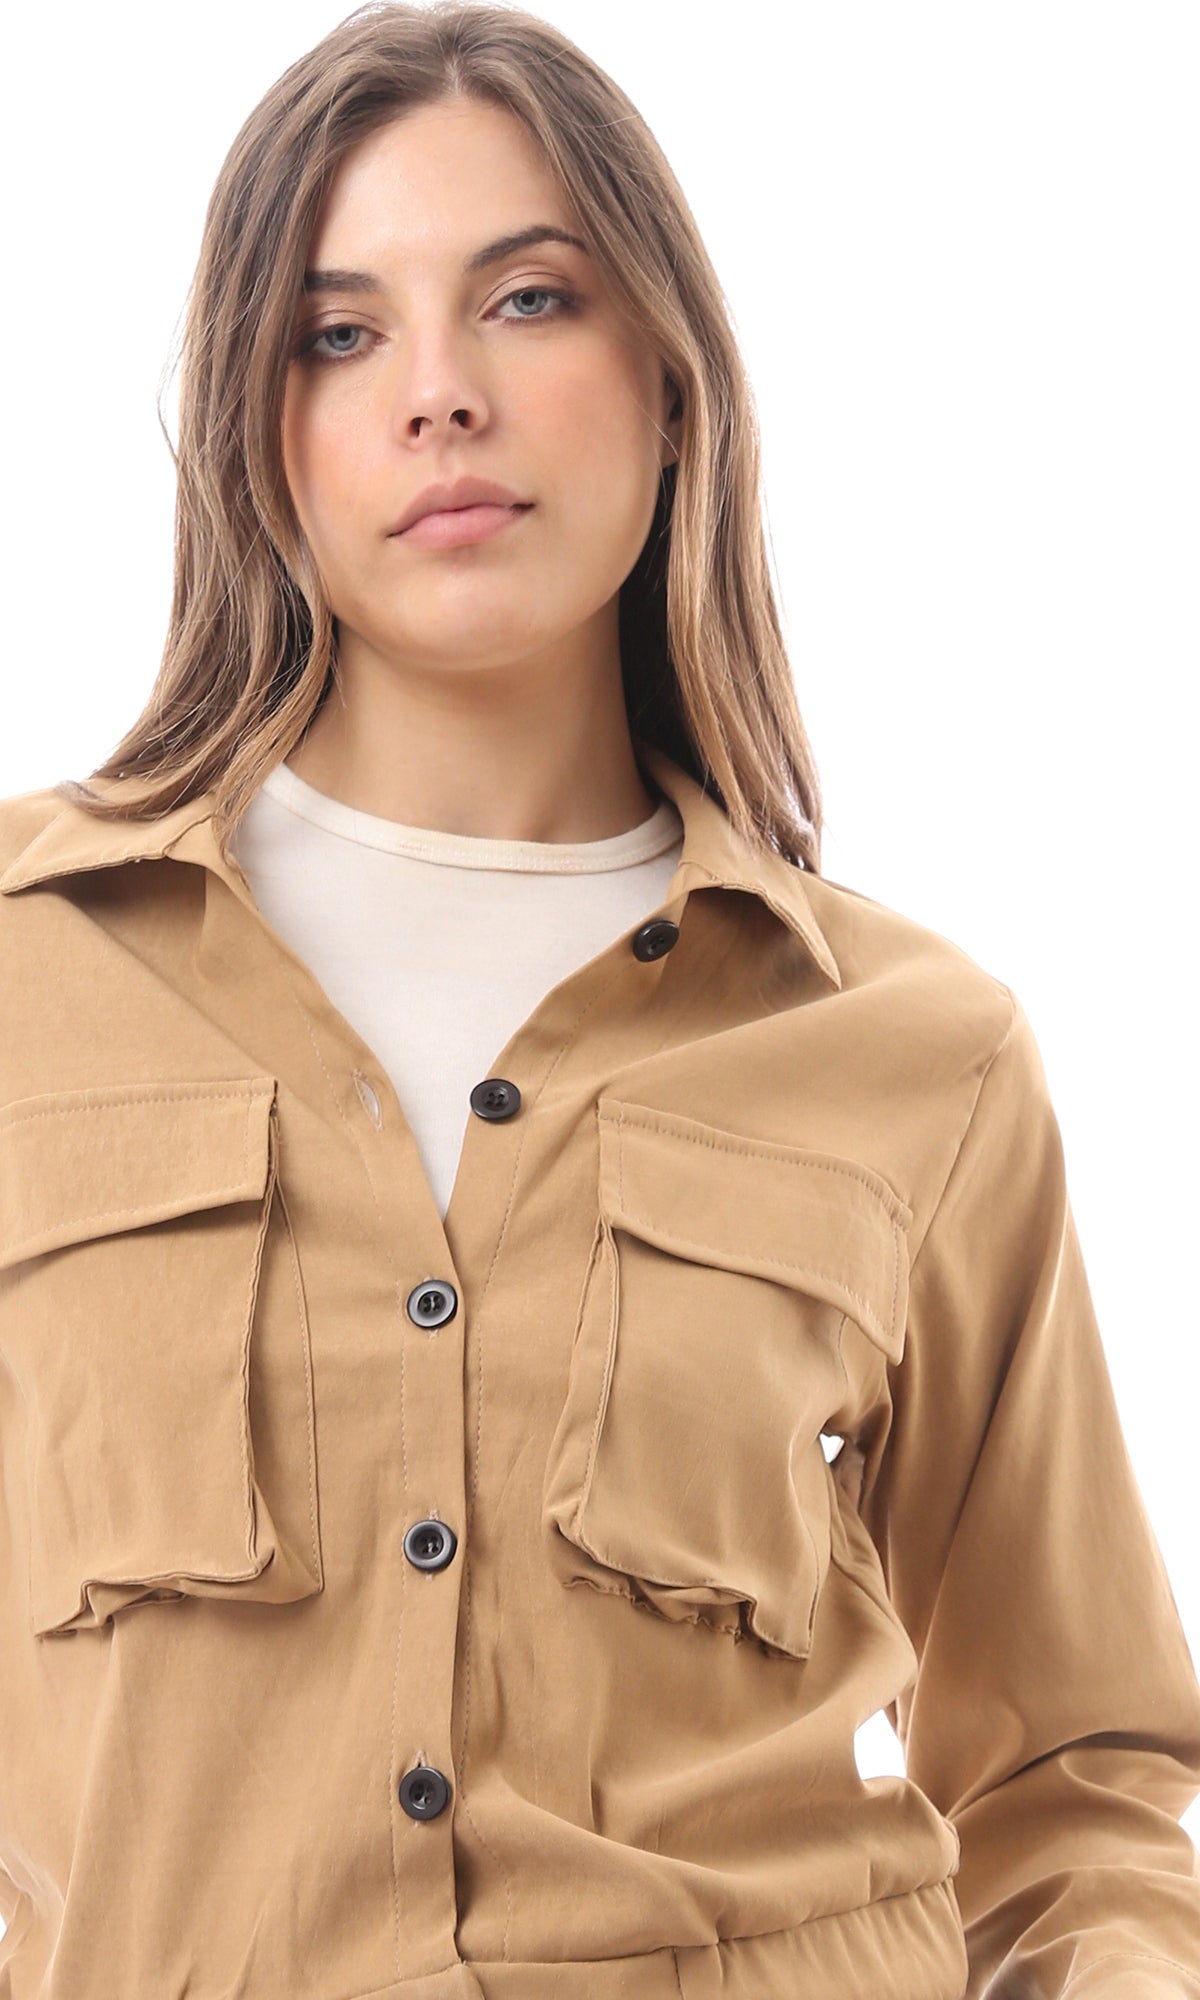 O170009 Camel Soft Cotton Jacket With Patched Pockets